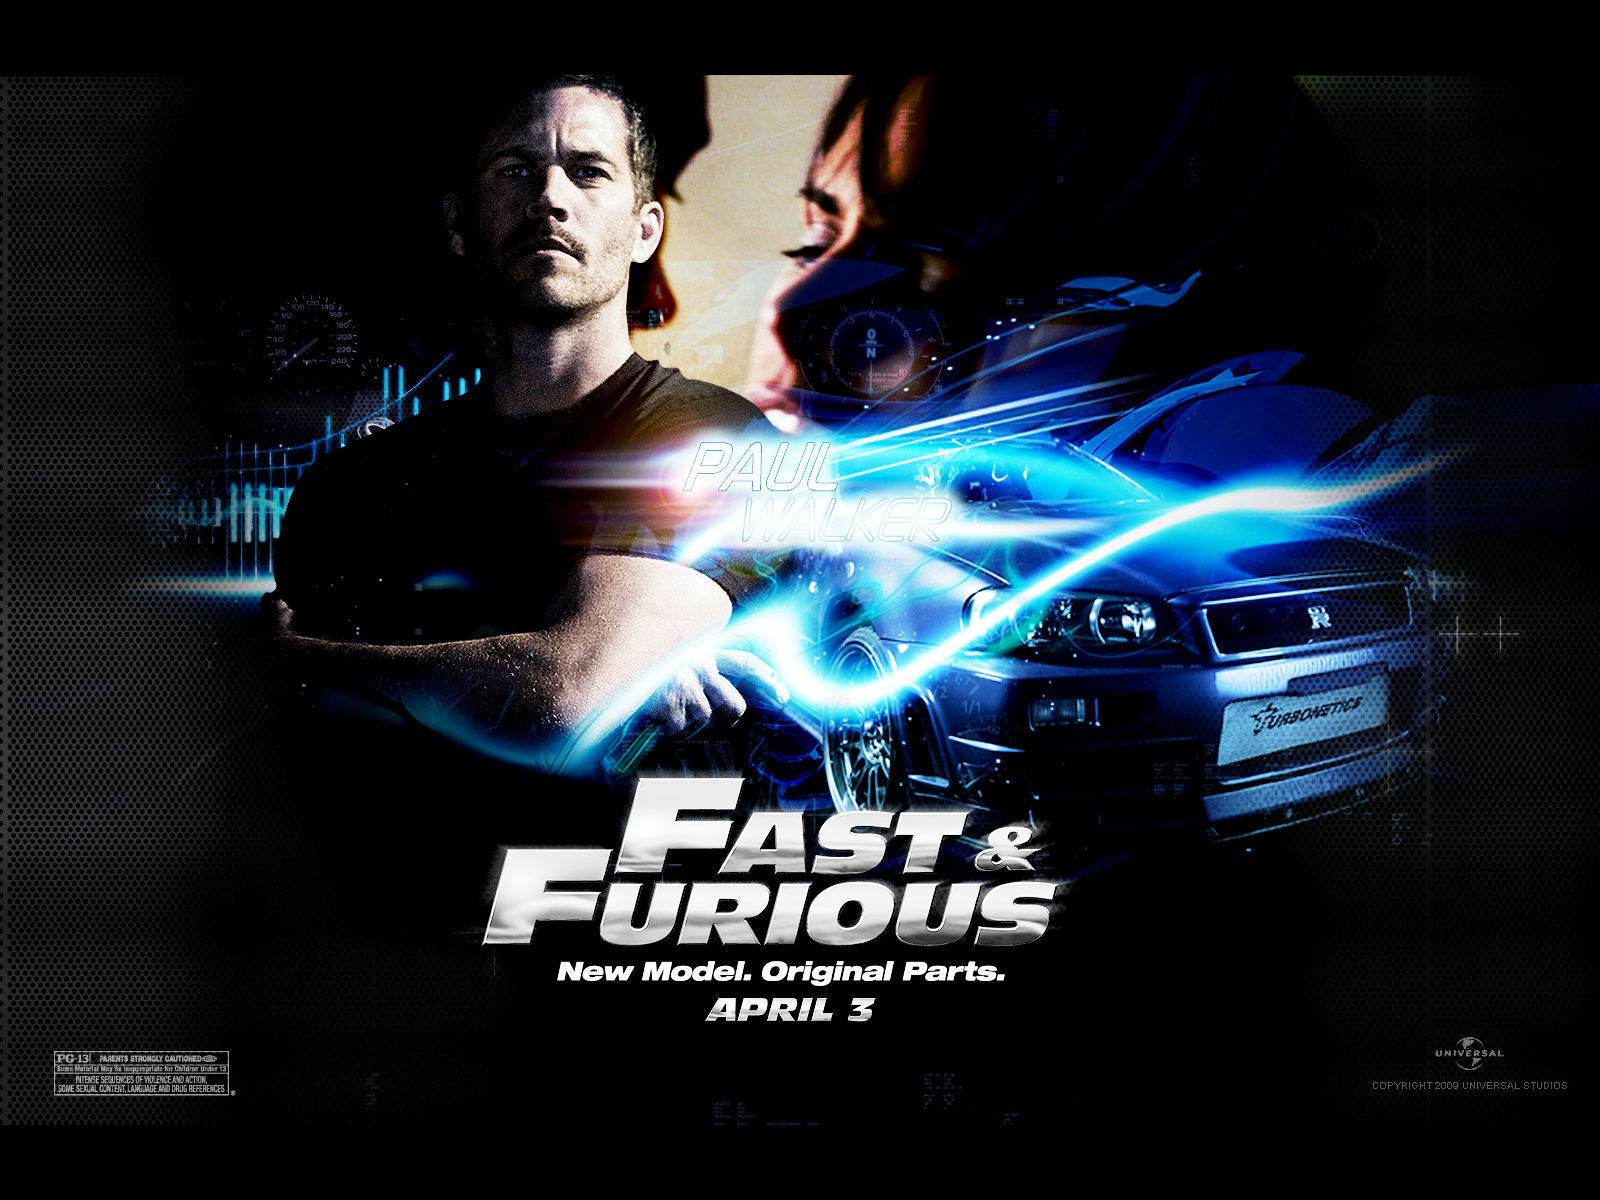 fast furious 2 torrent download free online